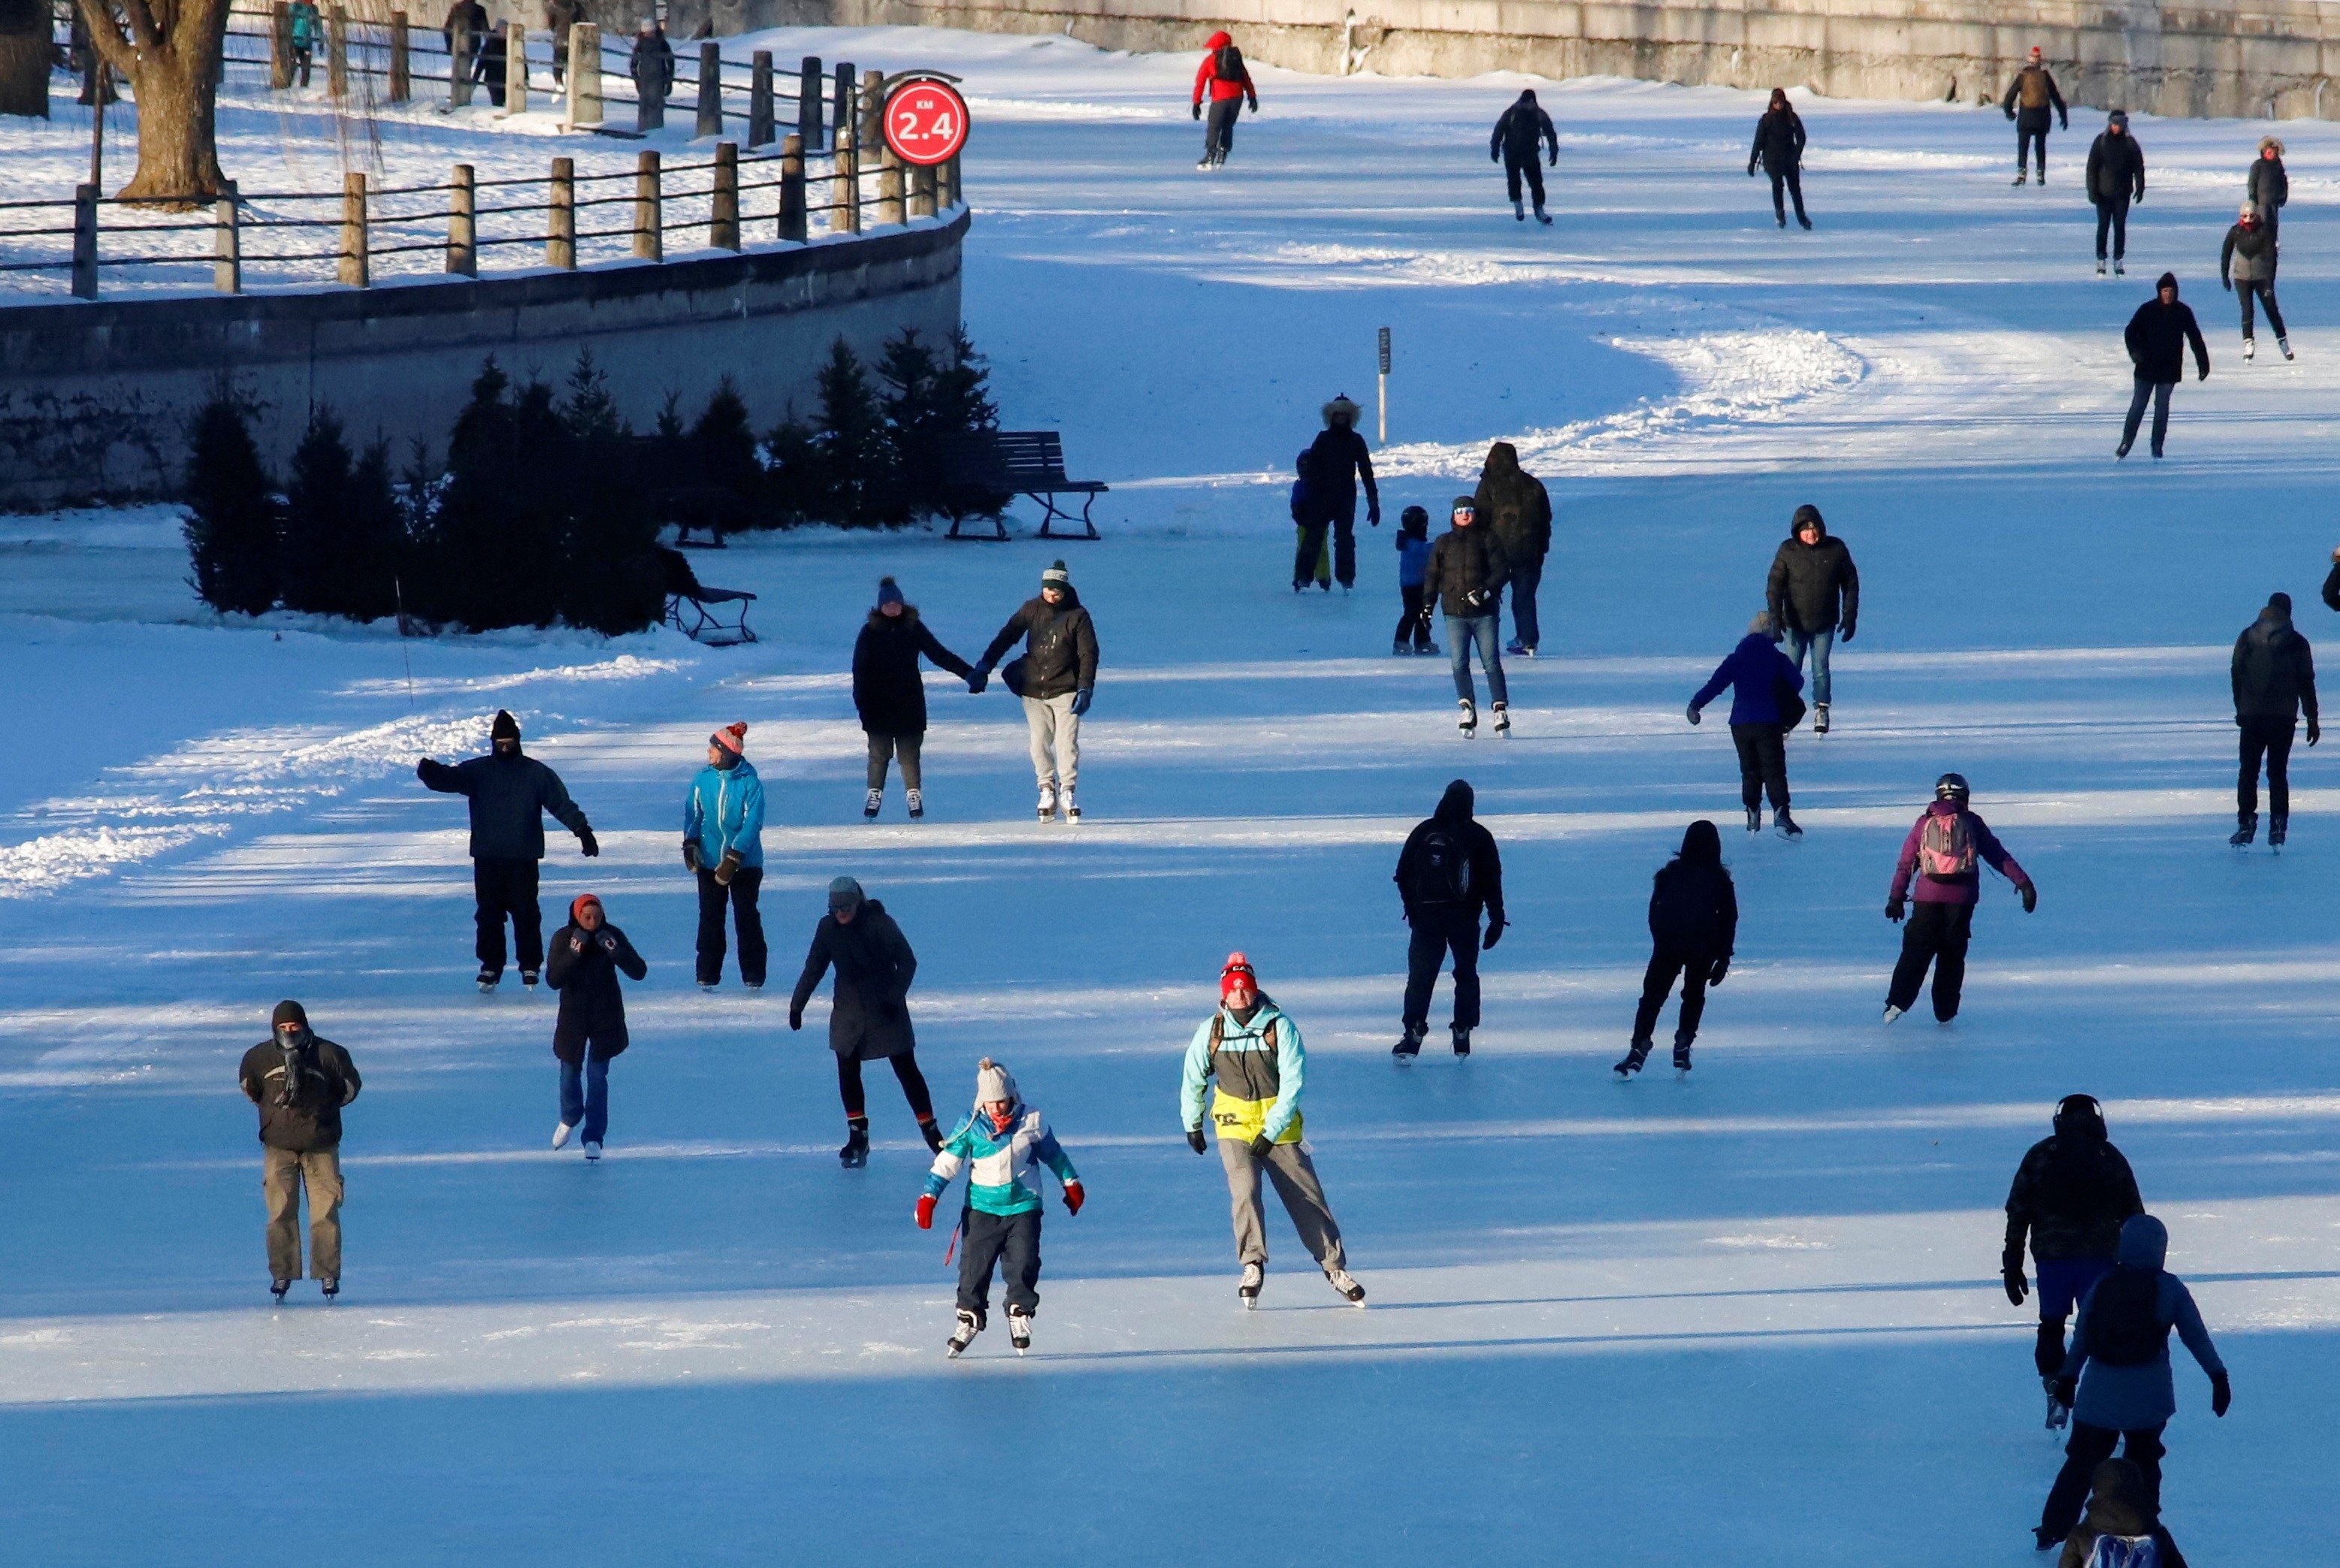 People skate on the Rideau Canal Skateway, the world's largest skating rink, during a period of subzero Arctic weather in Ottawa, Ontario, Canada January 14, 2022. Photo: Reuters